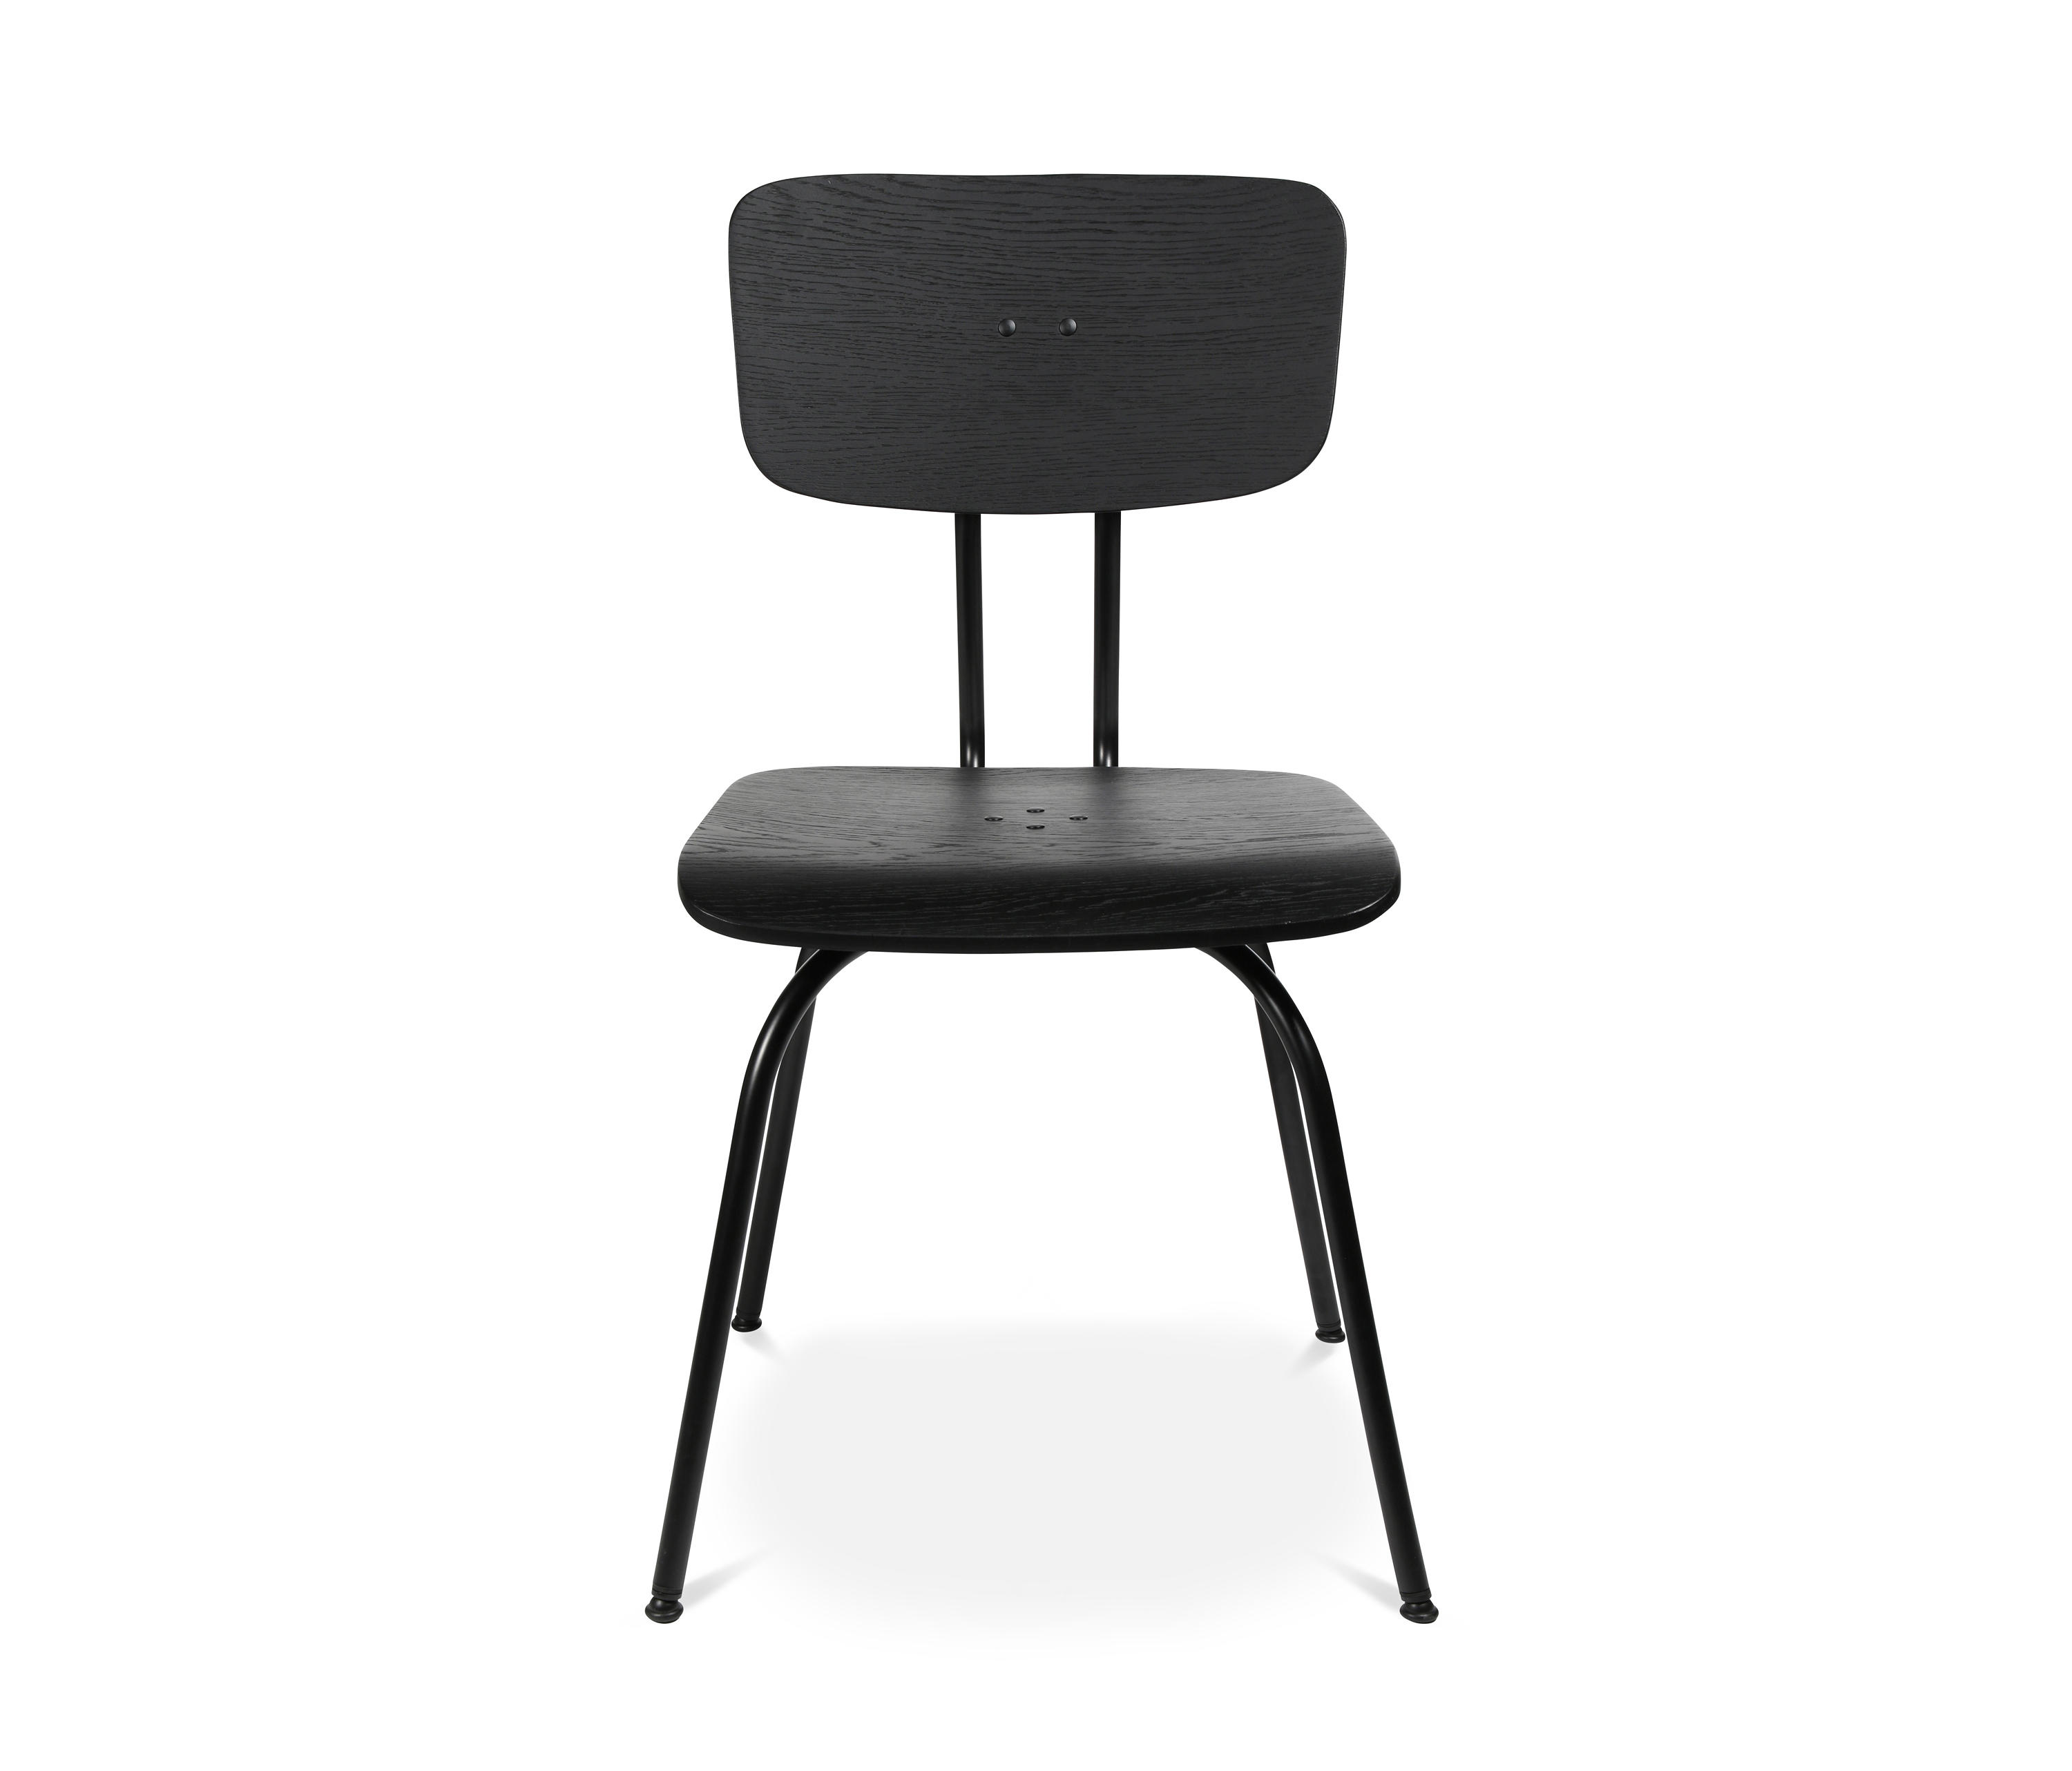 W-1970 Chair by Florian Kienast for Wagner